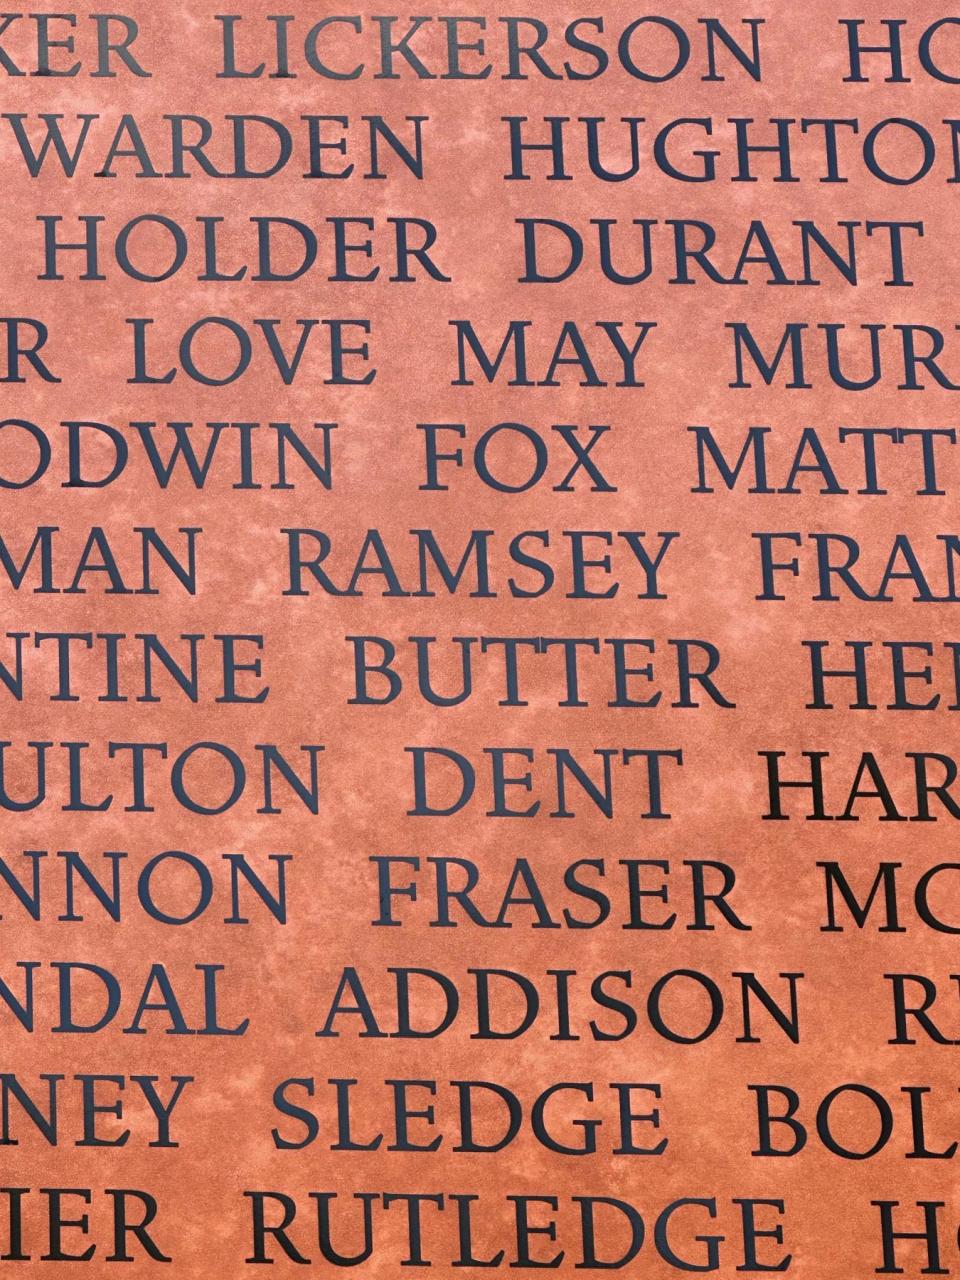 The author found his own family’s name — Ramsey— carved in the National Monument to Freedom.